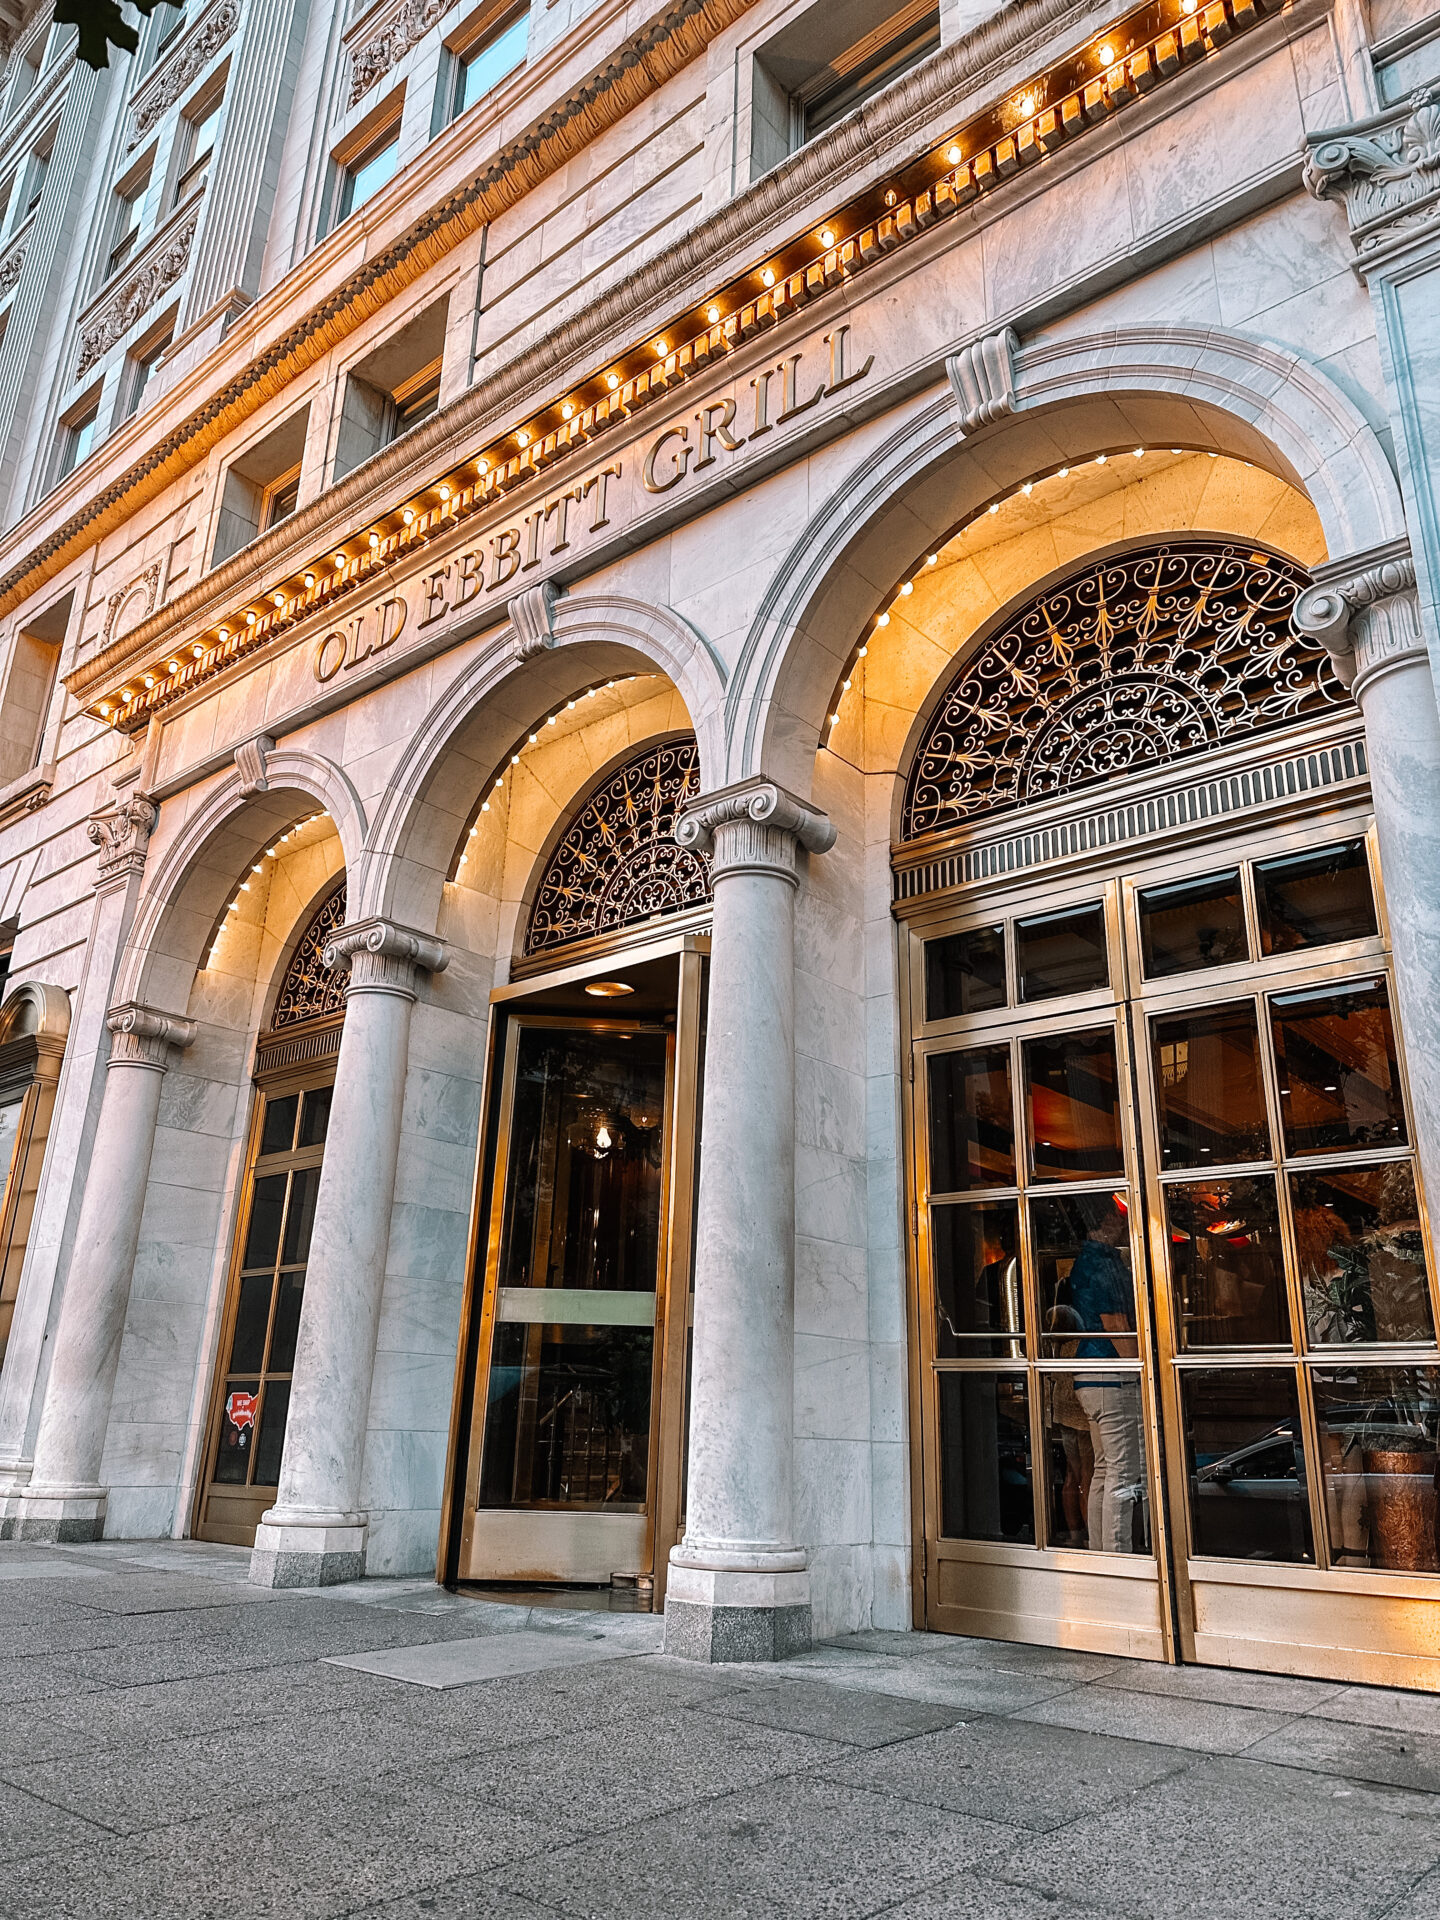 Old Ebbitt Grill Washington DC review by travel blogger Angela Lanter